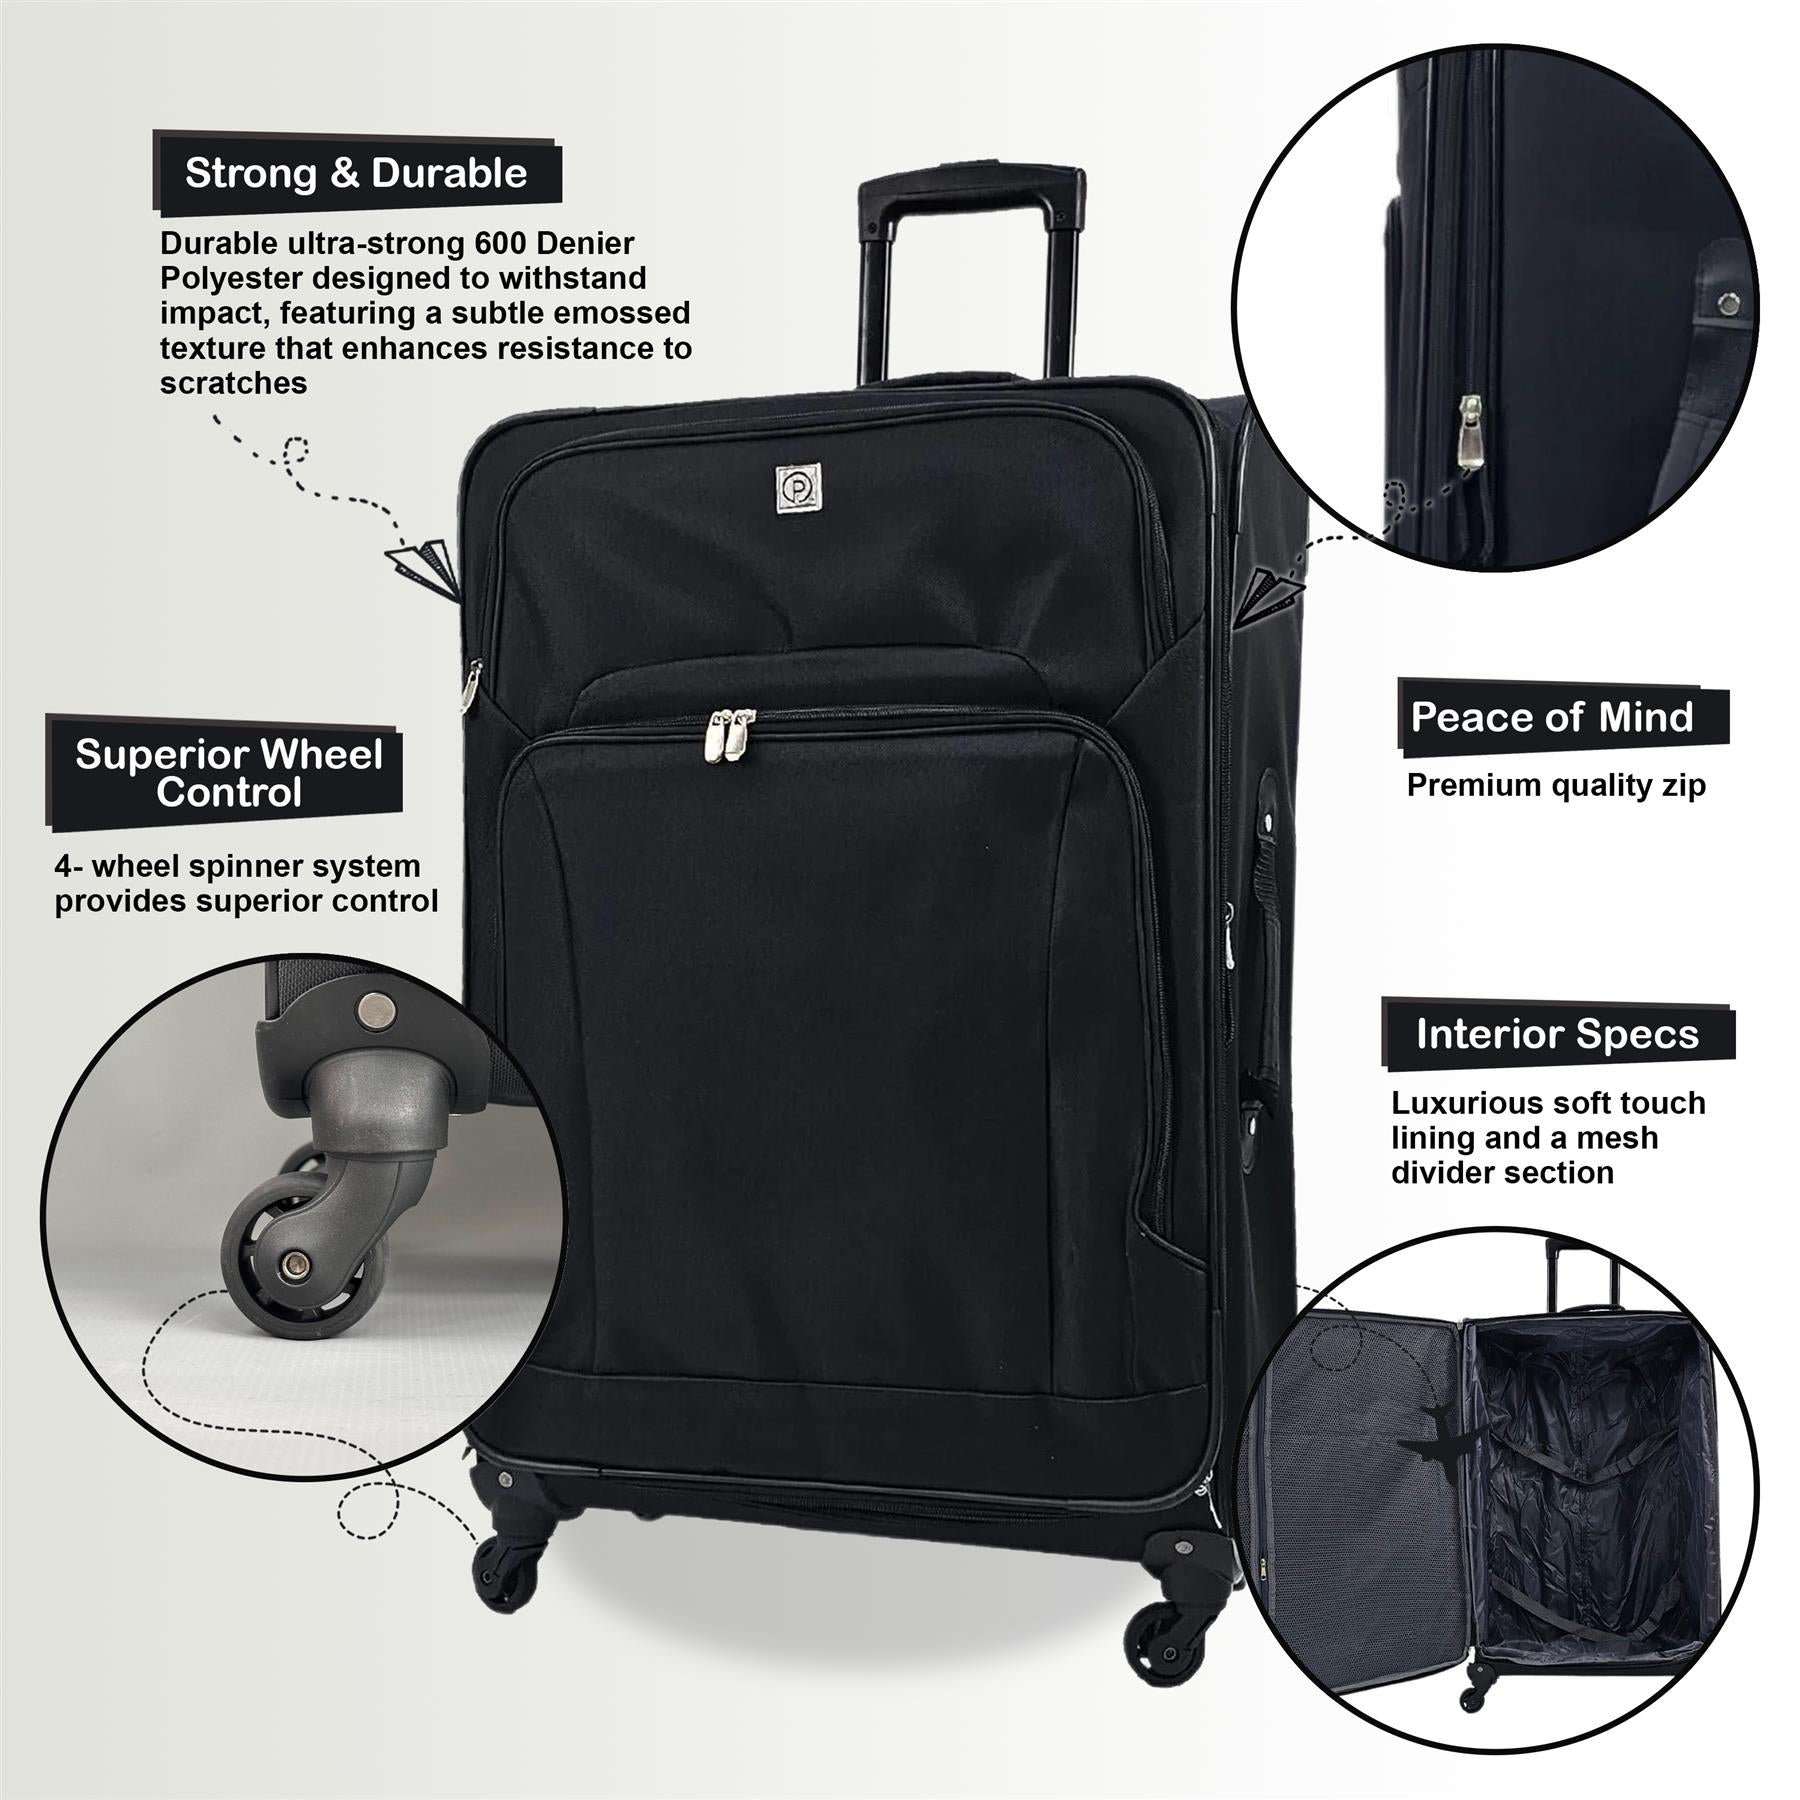 Coaling Set of 3 Soft Shell Suitcase in Black